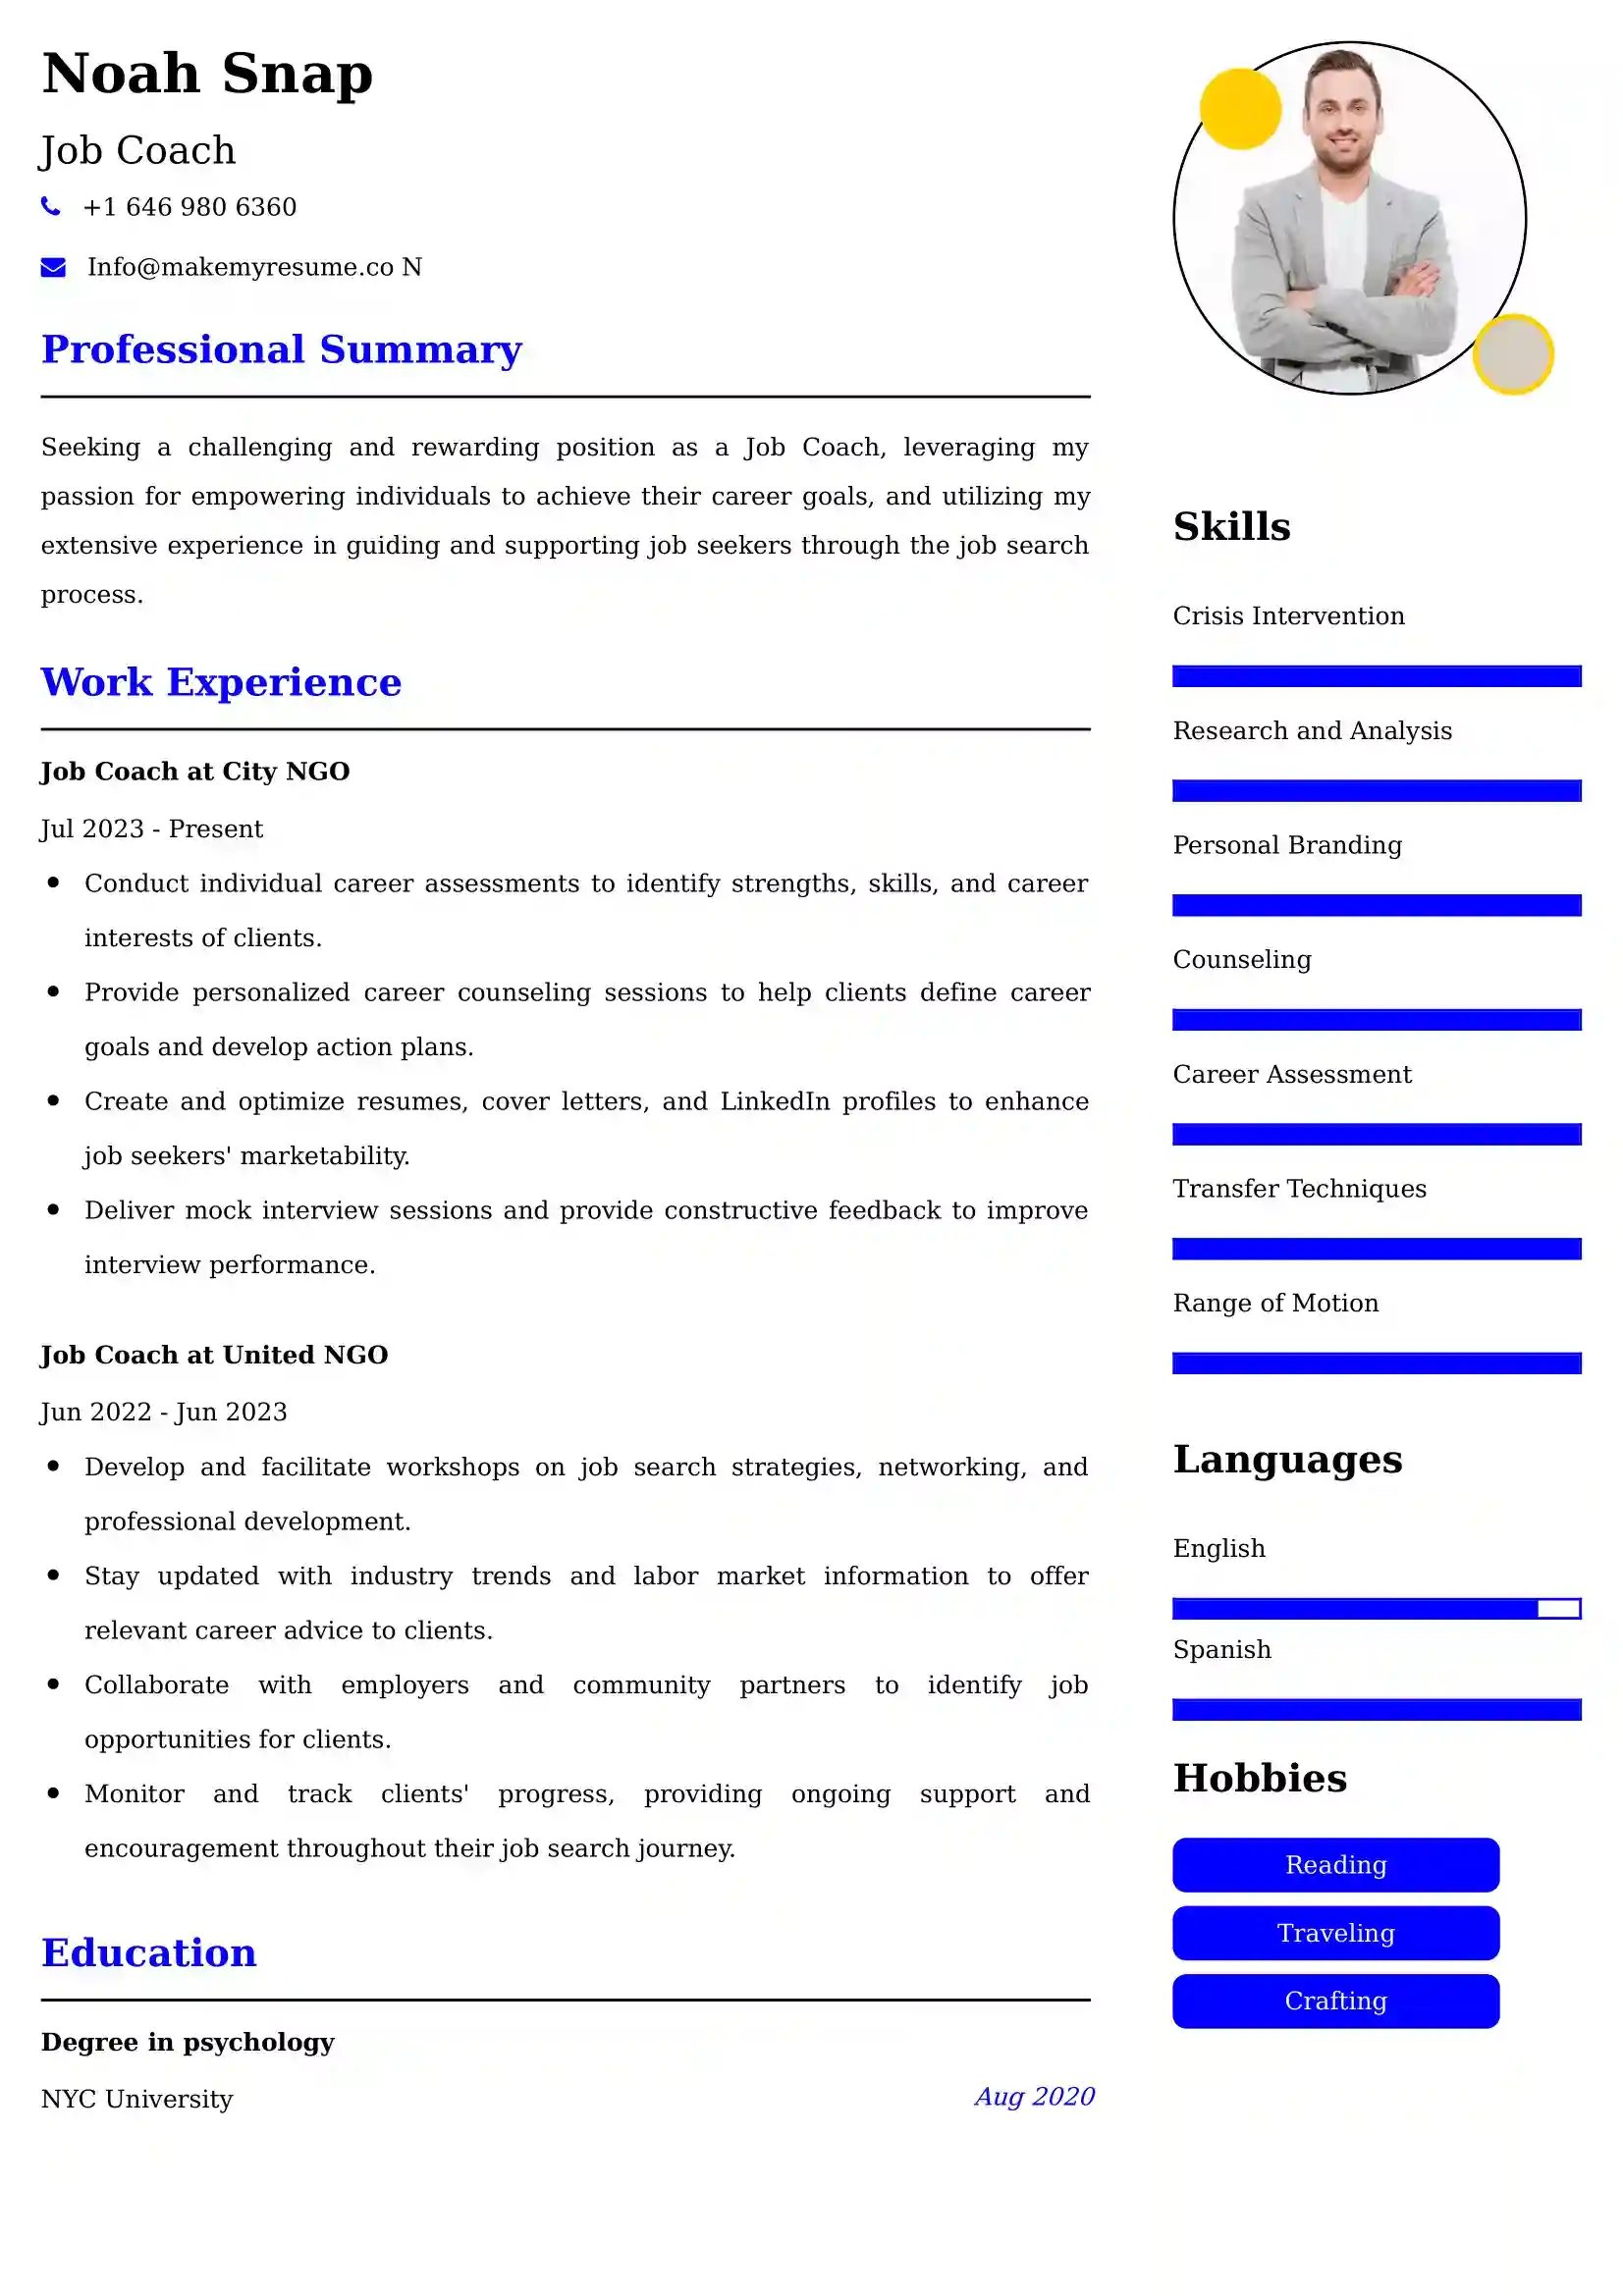 Job Coach Resume Examples - UK Format, Latest Template.